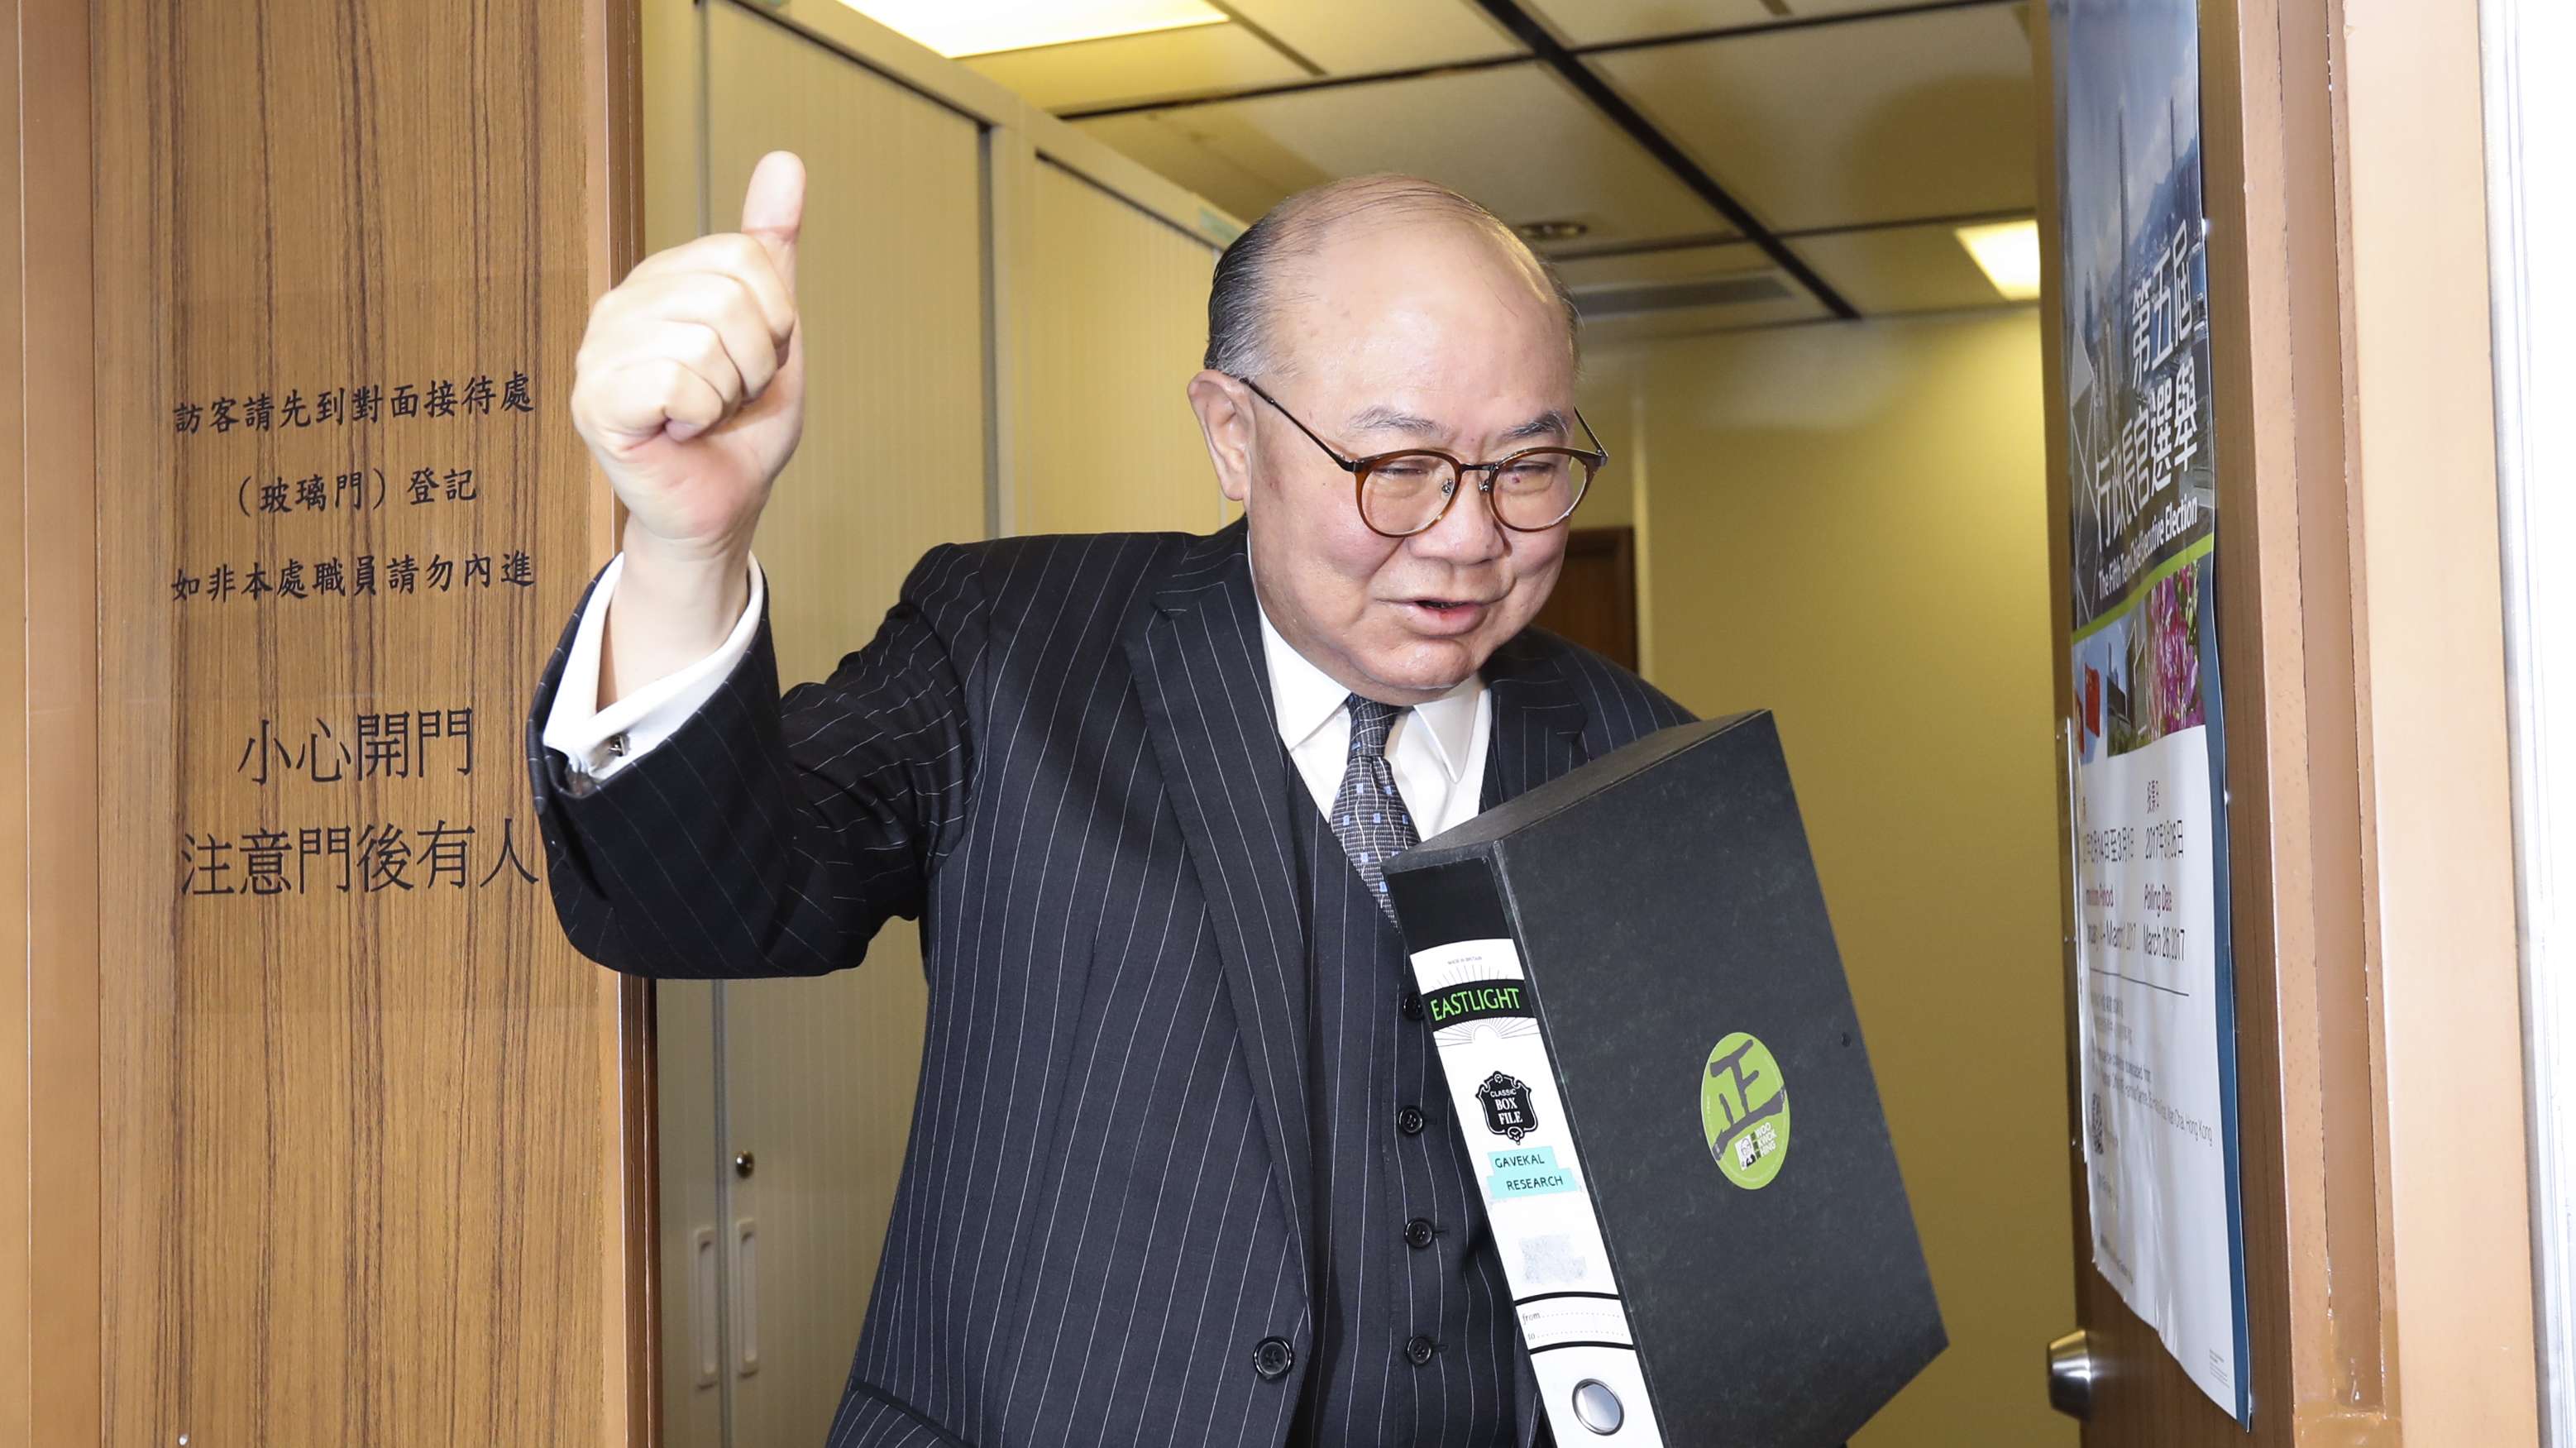 Woo Kwok-hing hands his nomination forms to election staff on Monday. Photo: Edward Wong